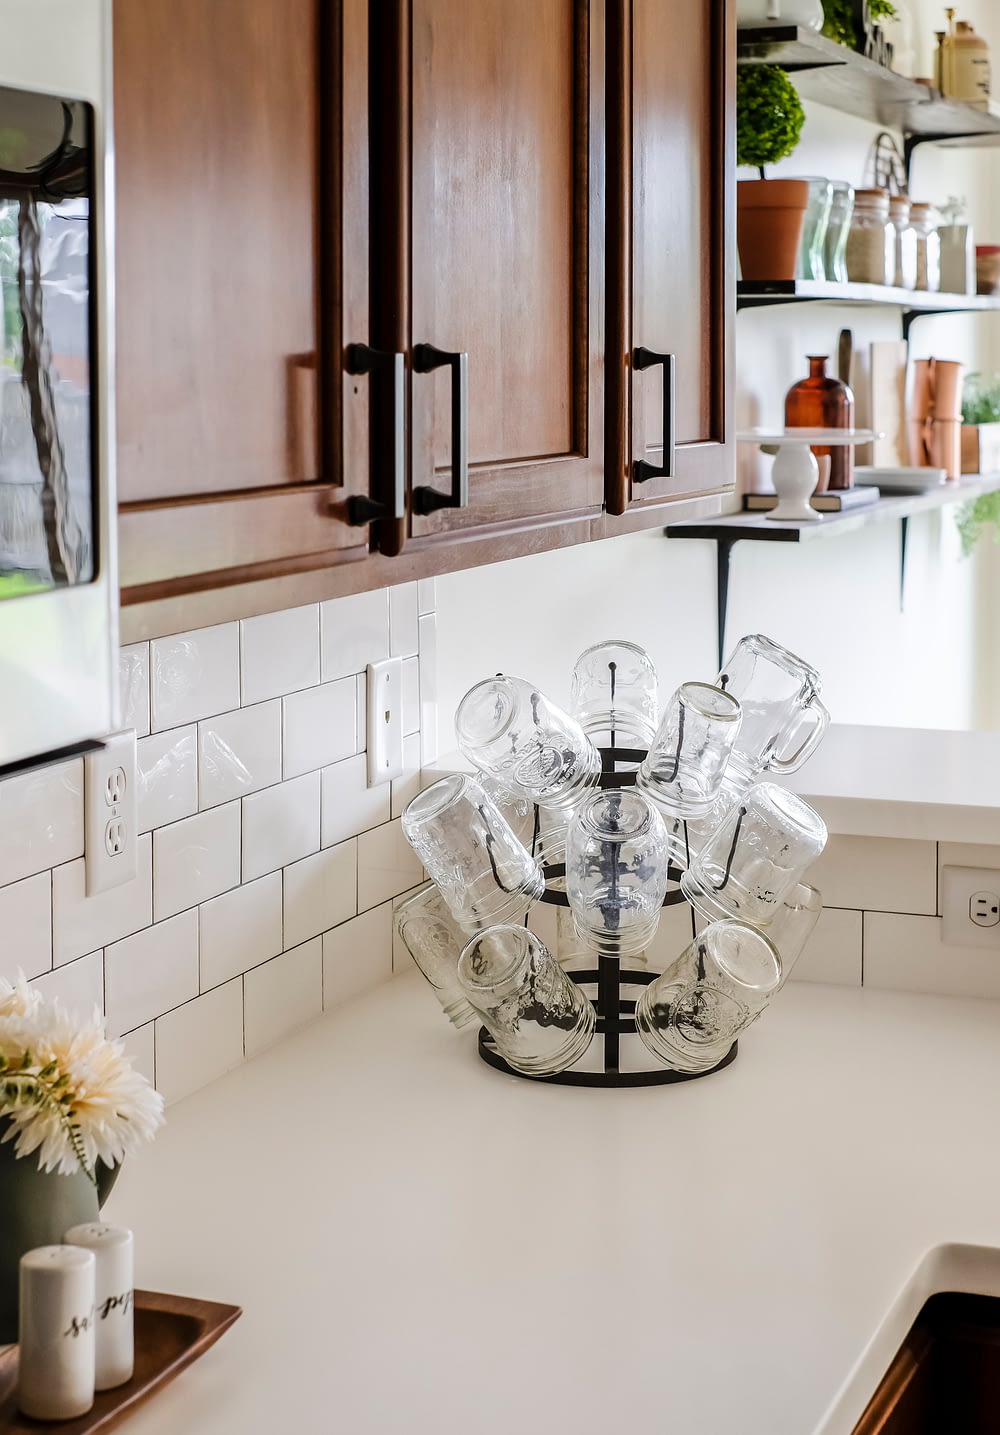 white solid surface countertops with mason jar glasses on a cup holder